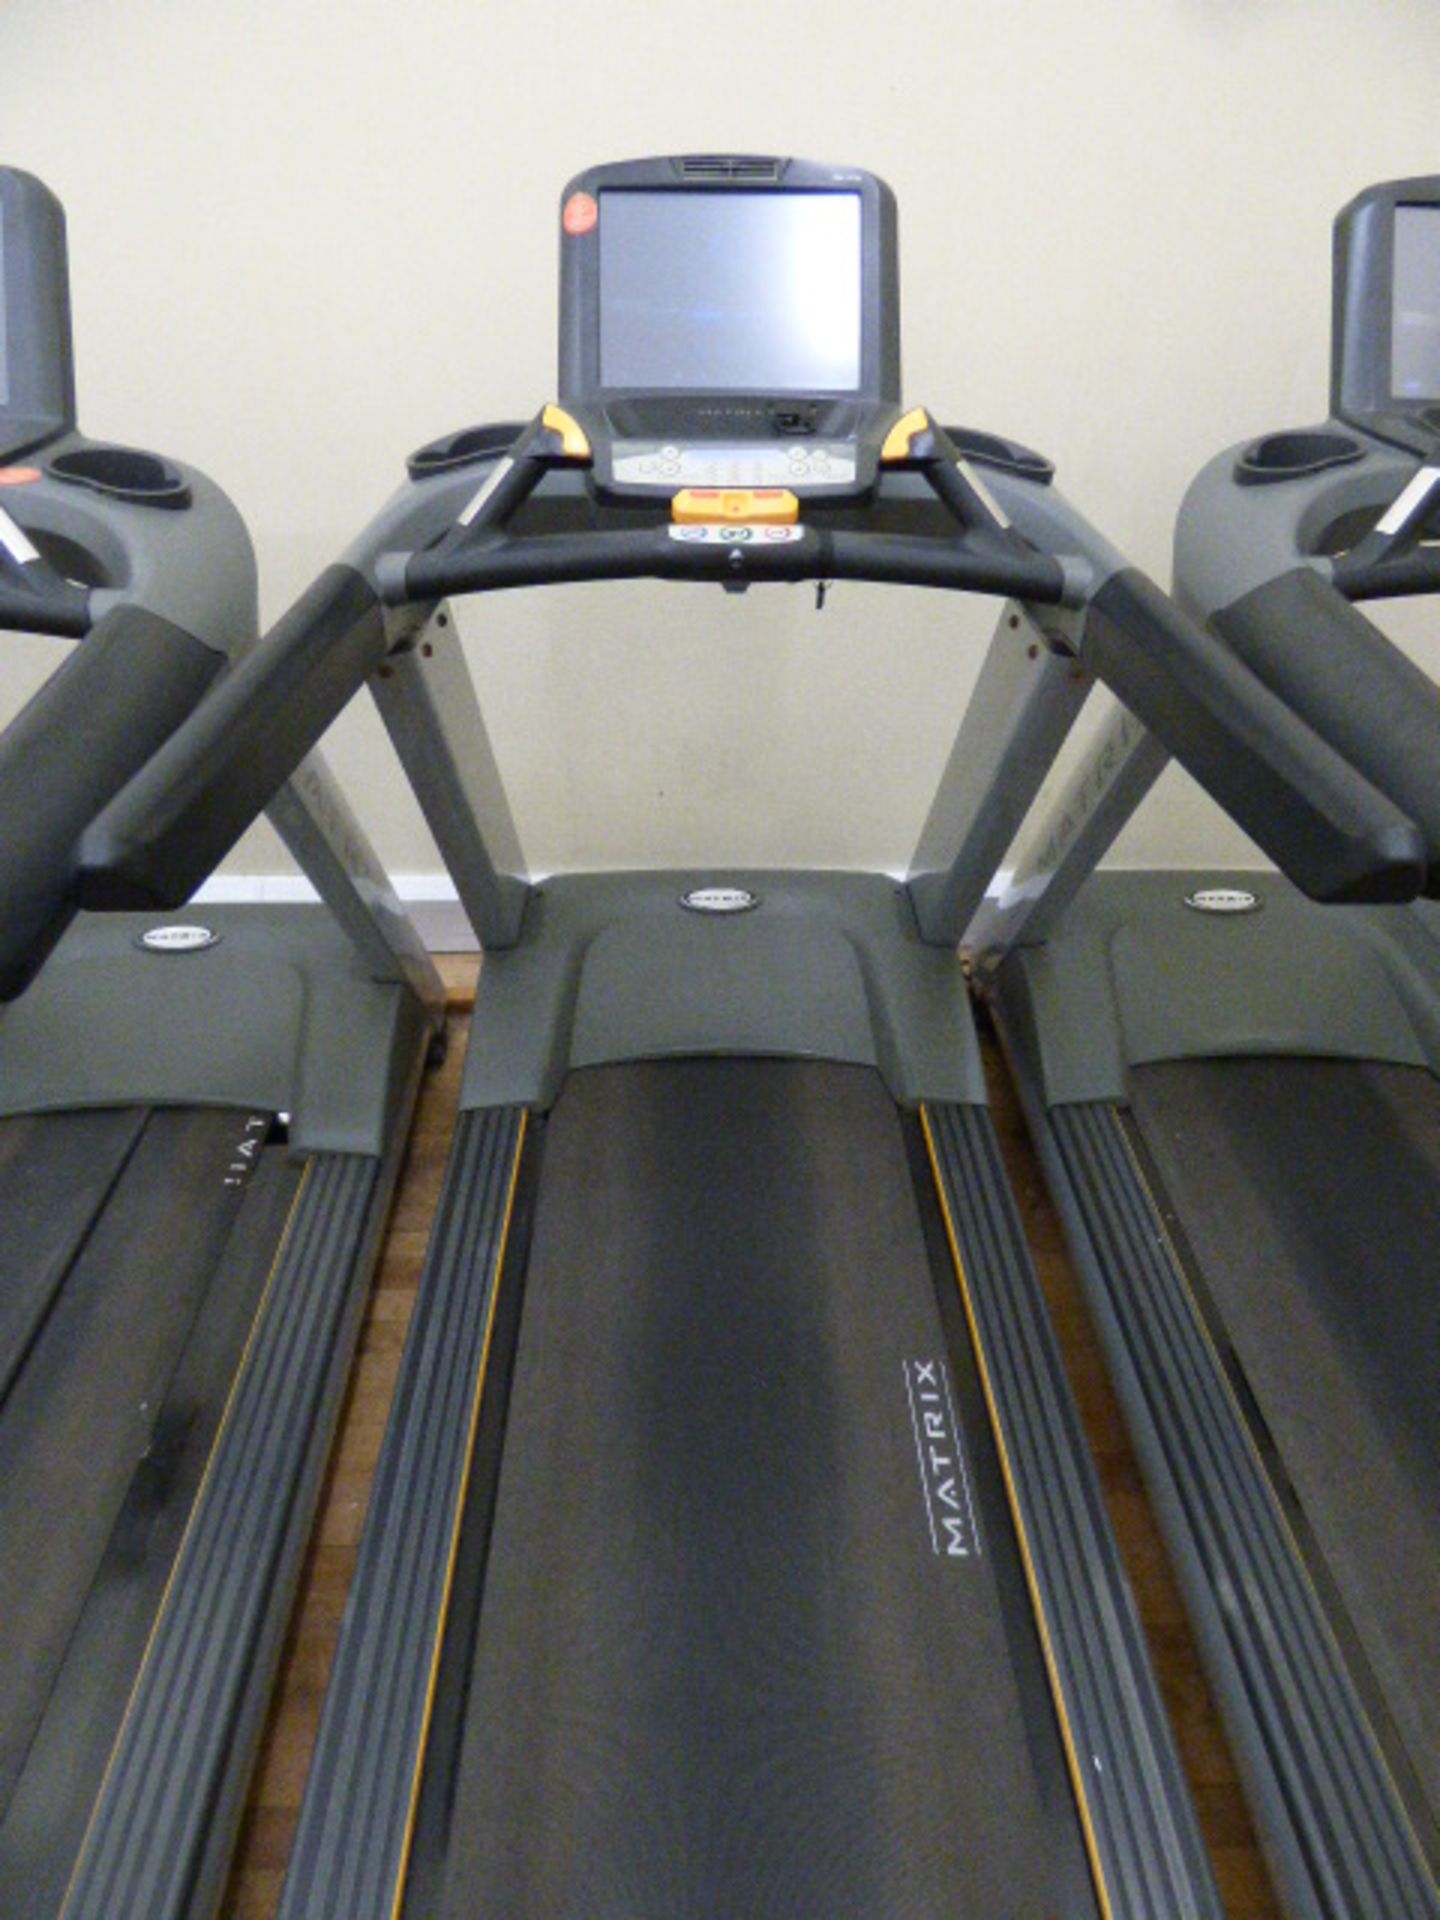 *Matrix ultimate deck treadmill with touch screen and nike plus ipod dock station